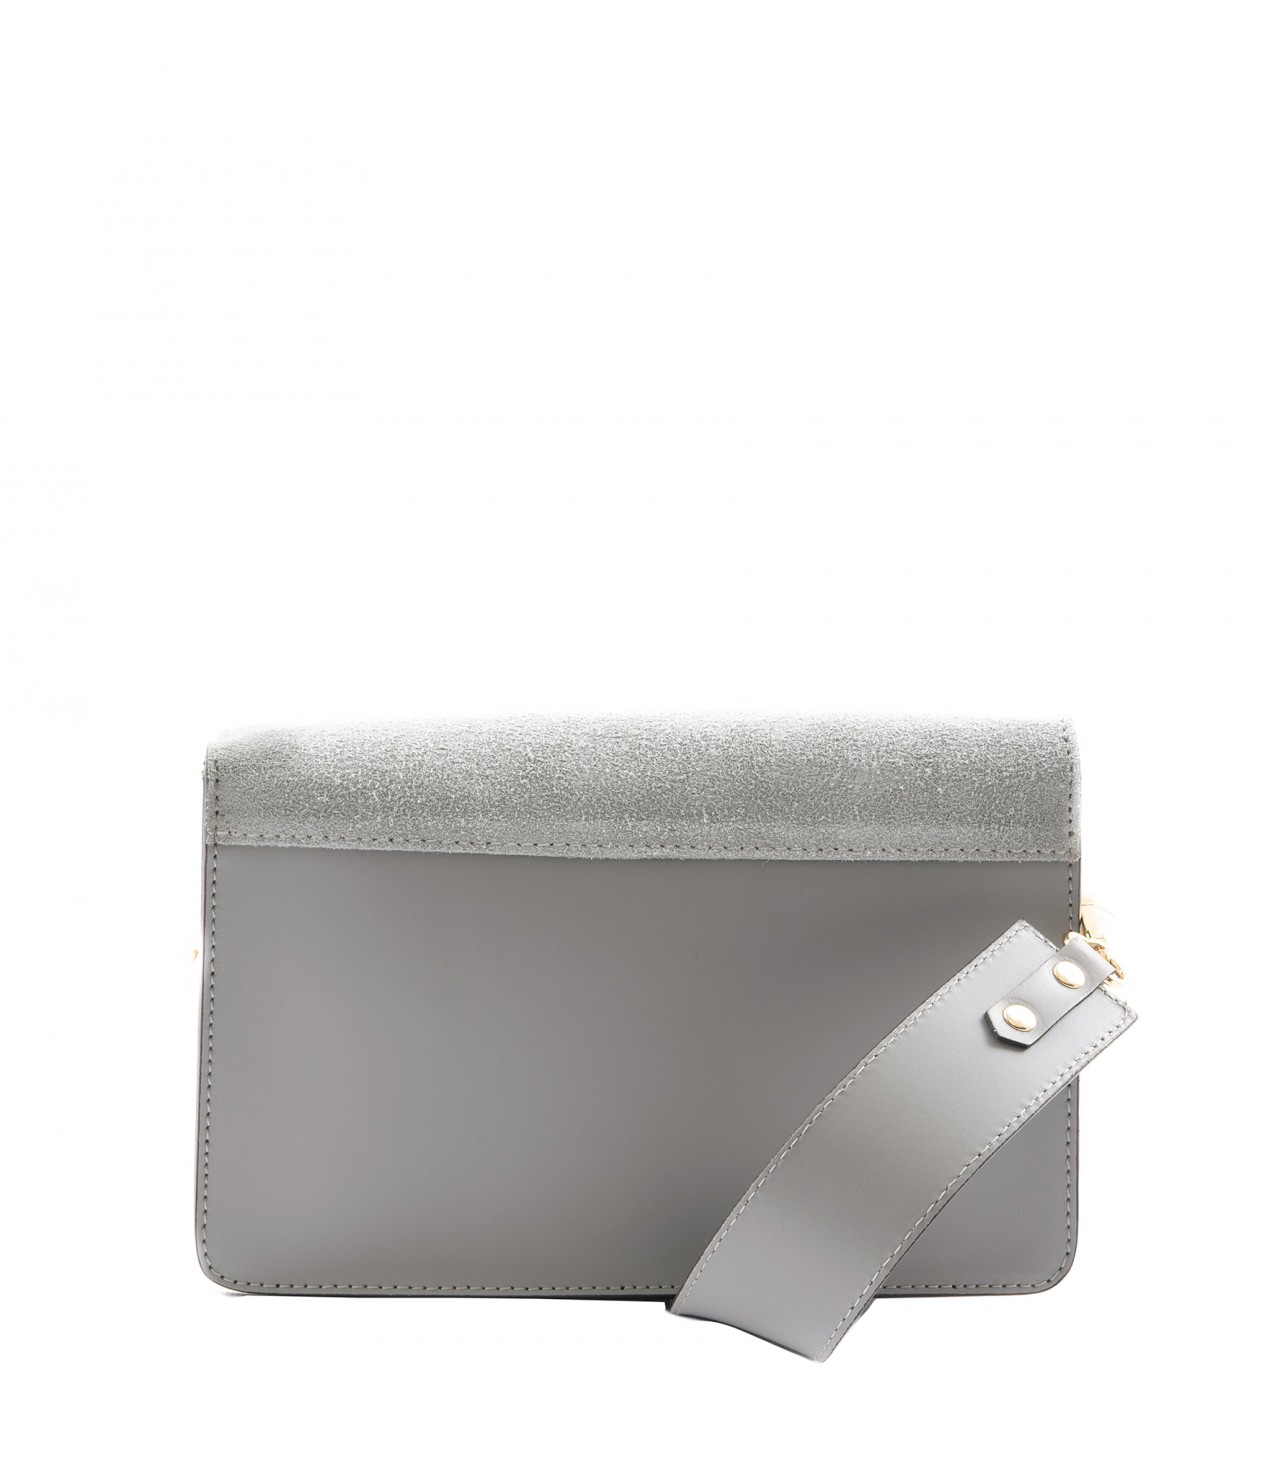 Leather and suede crossbody bag - Camelia Roma